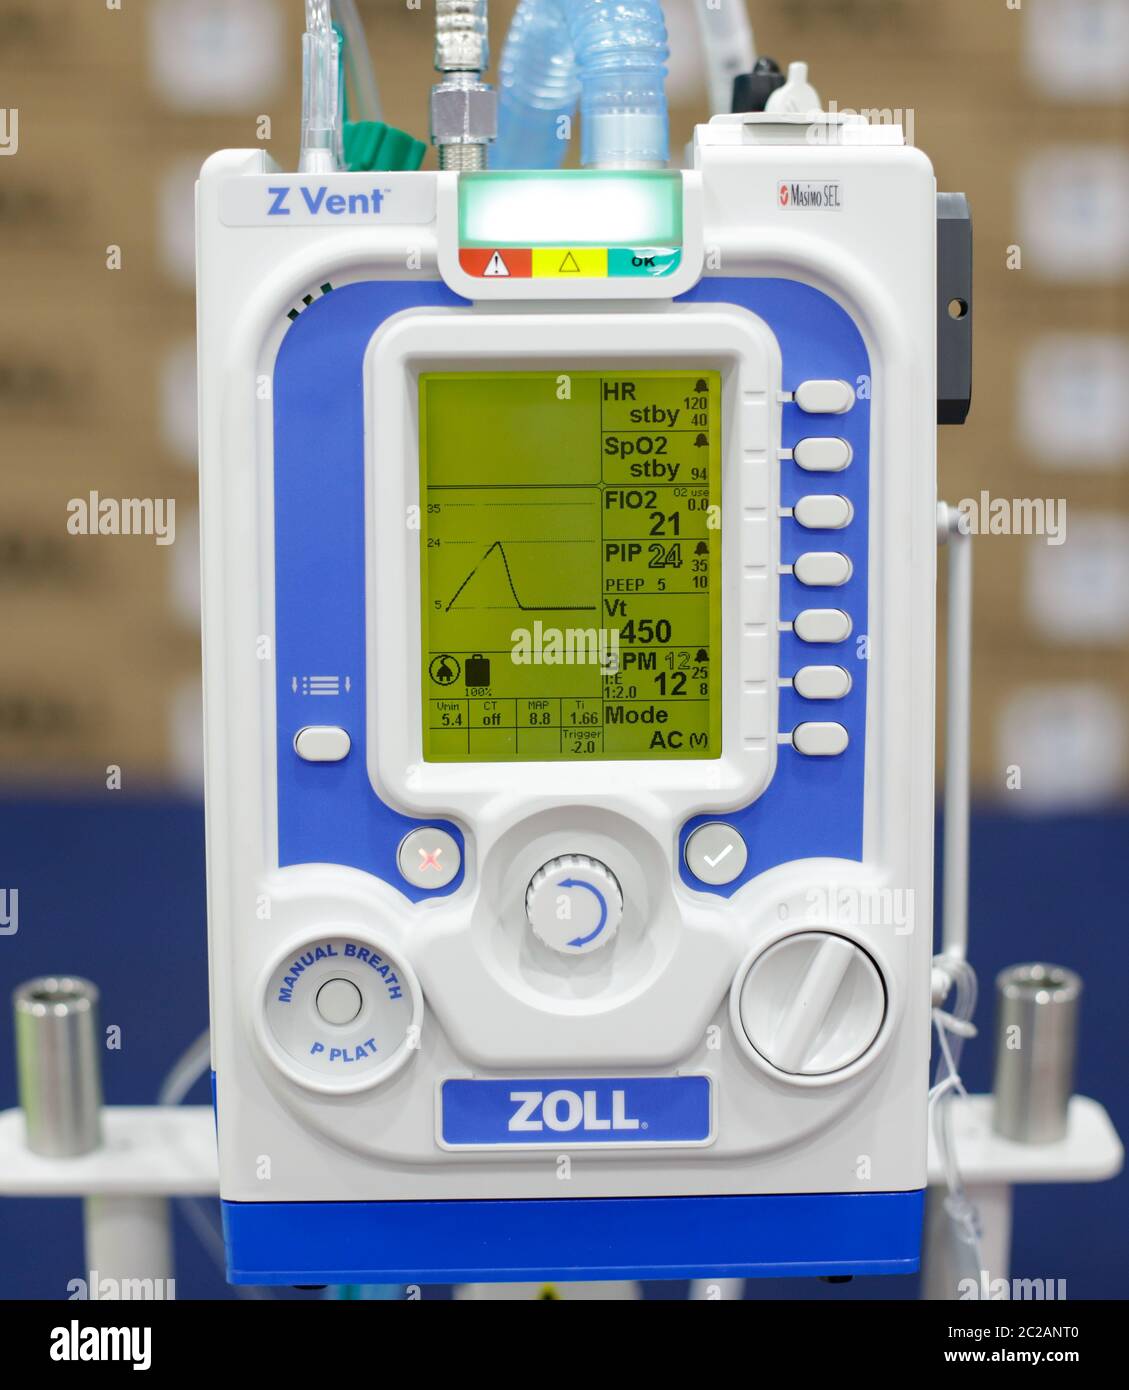 Bucharest, Romania - June 10, 2020: A Zoll portable mechanical medical ventilator on display during a press conference. Stock Photo